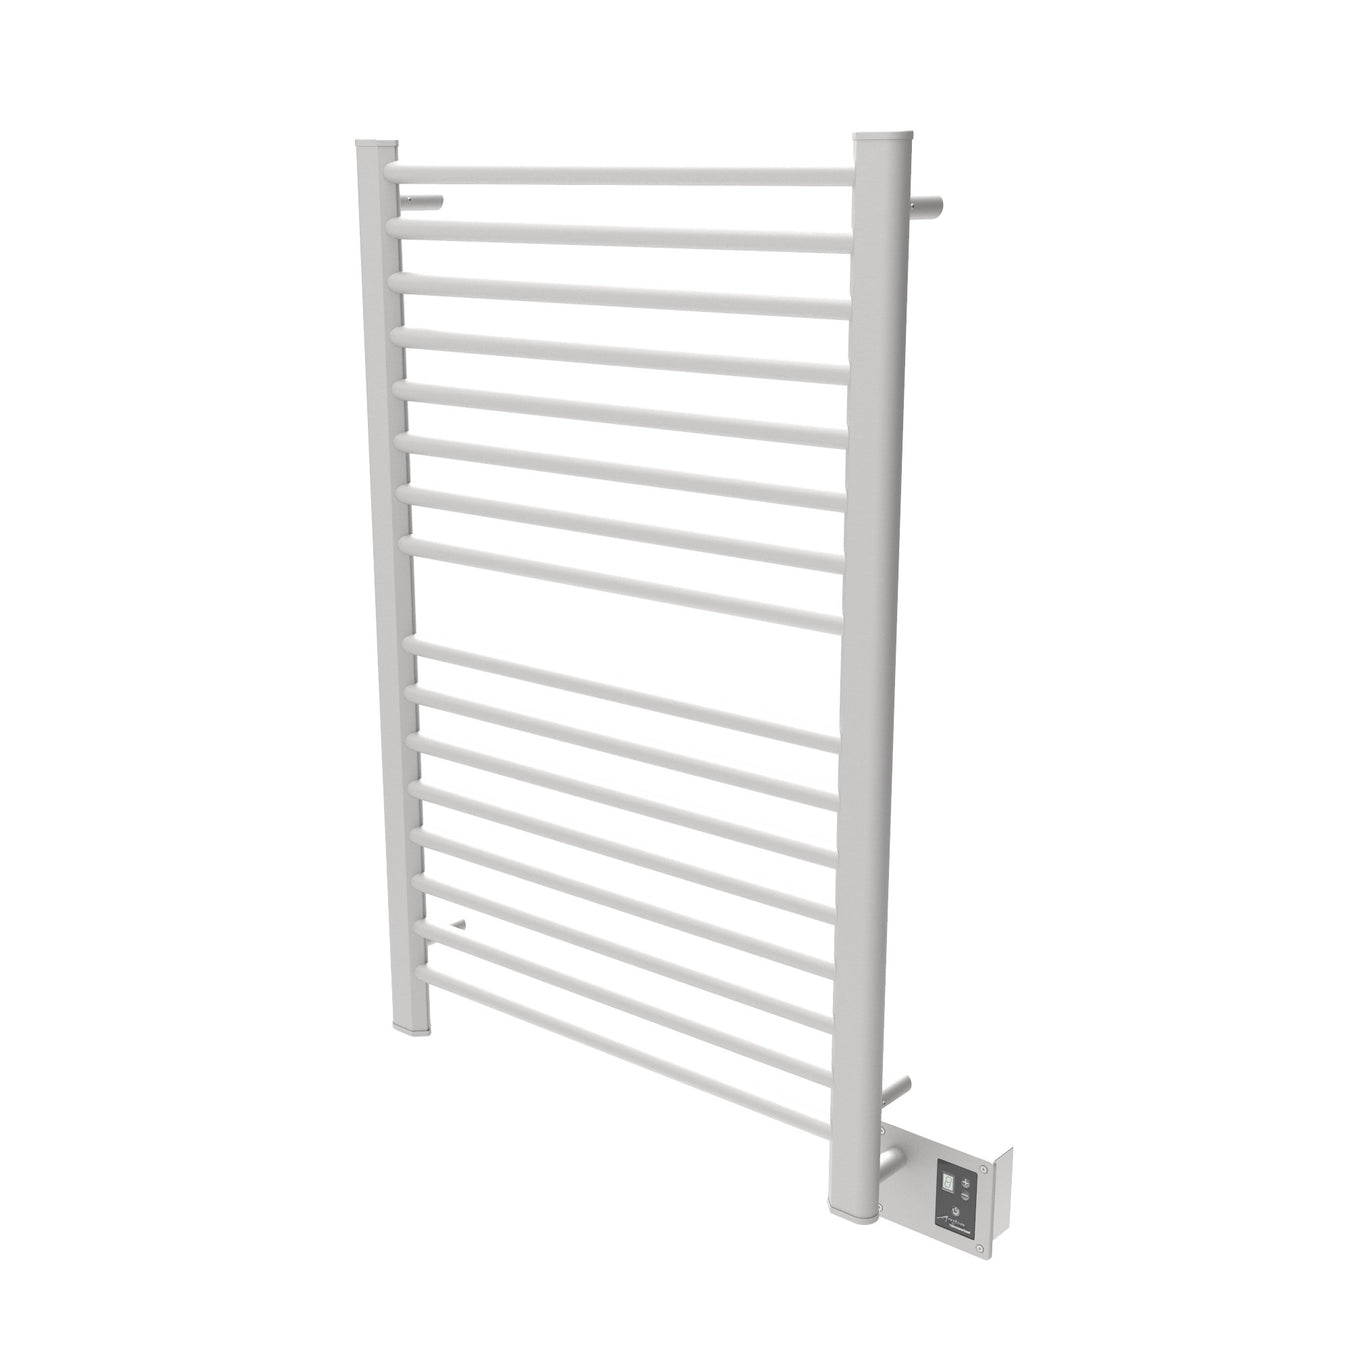 Amba Products Sirio Collection S2942 Towel Warmers